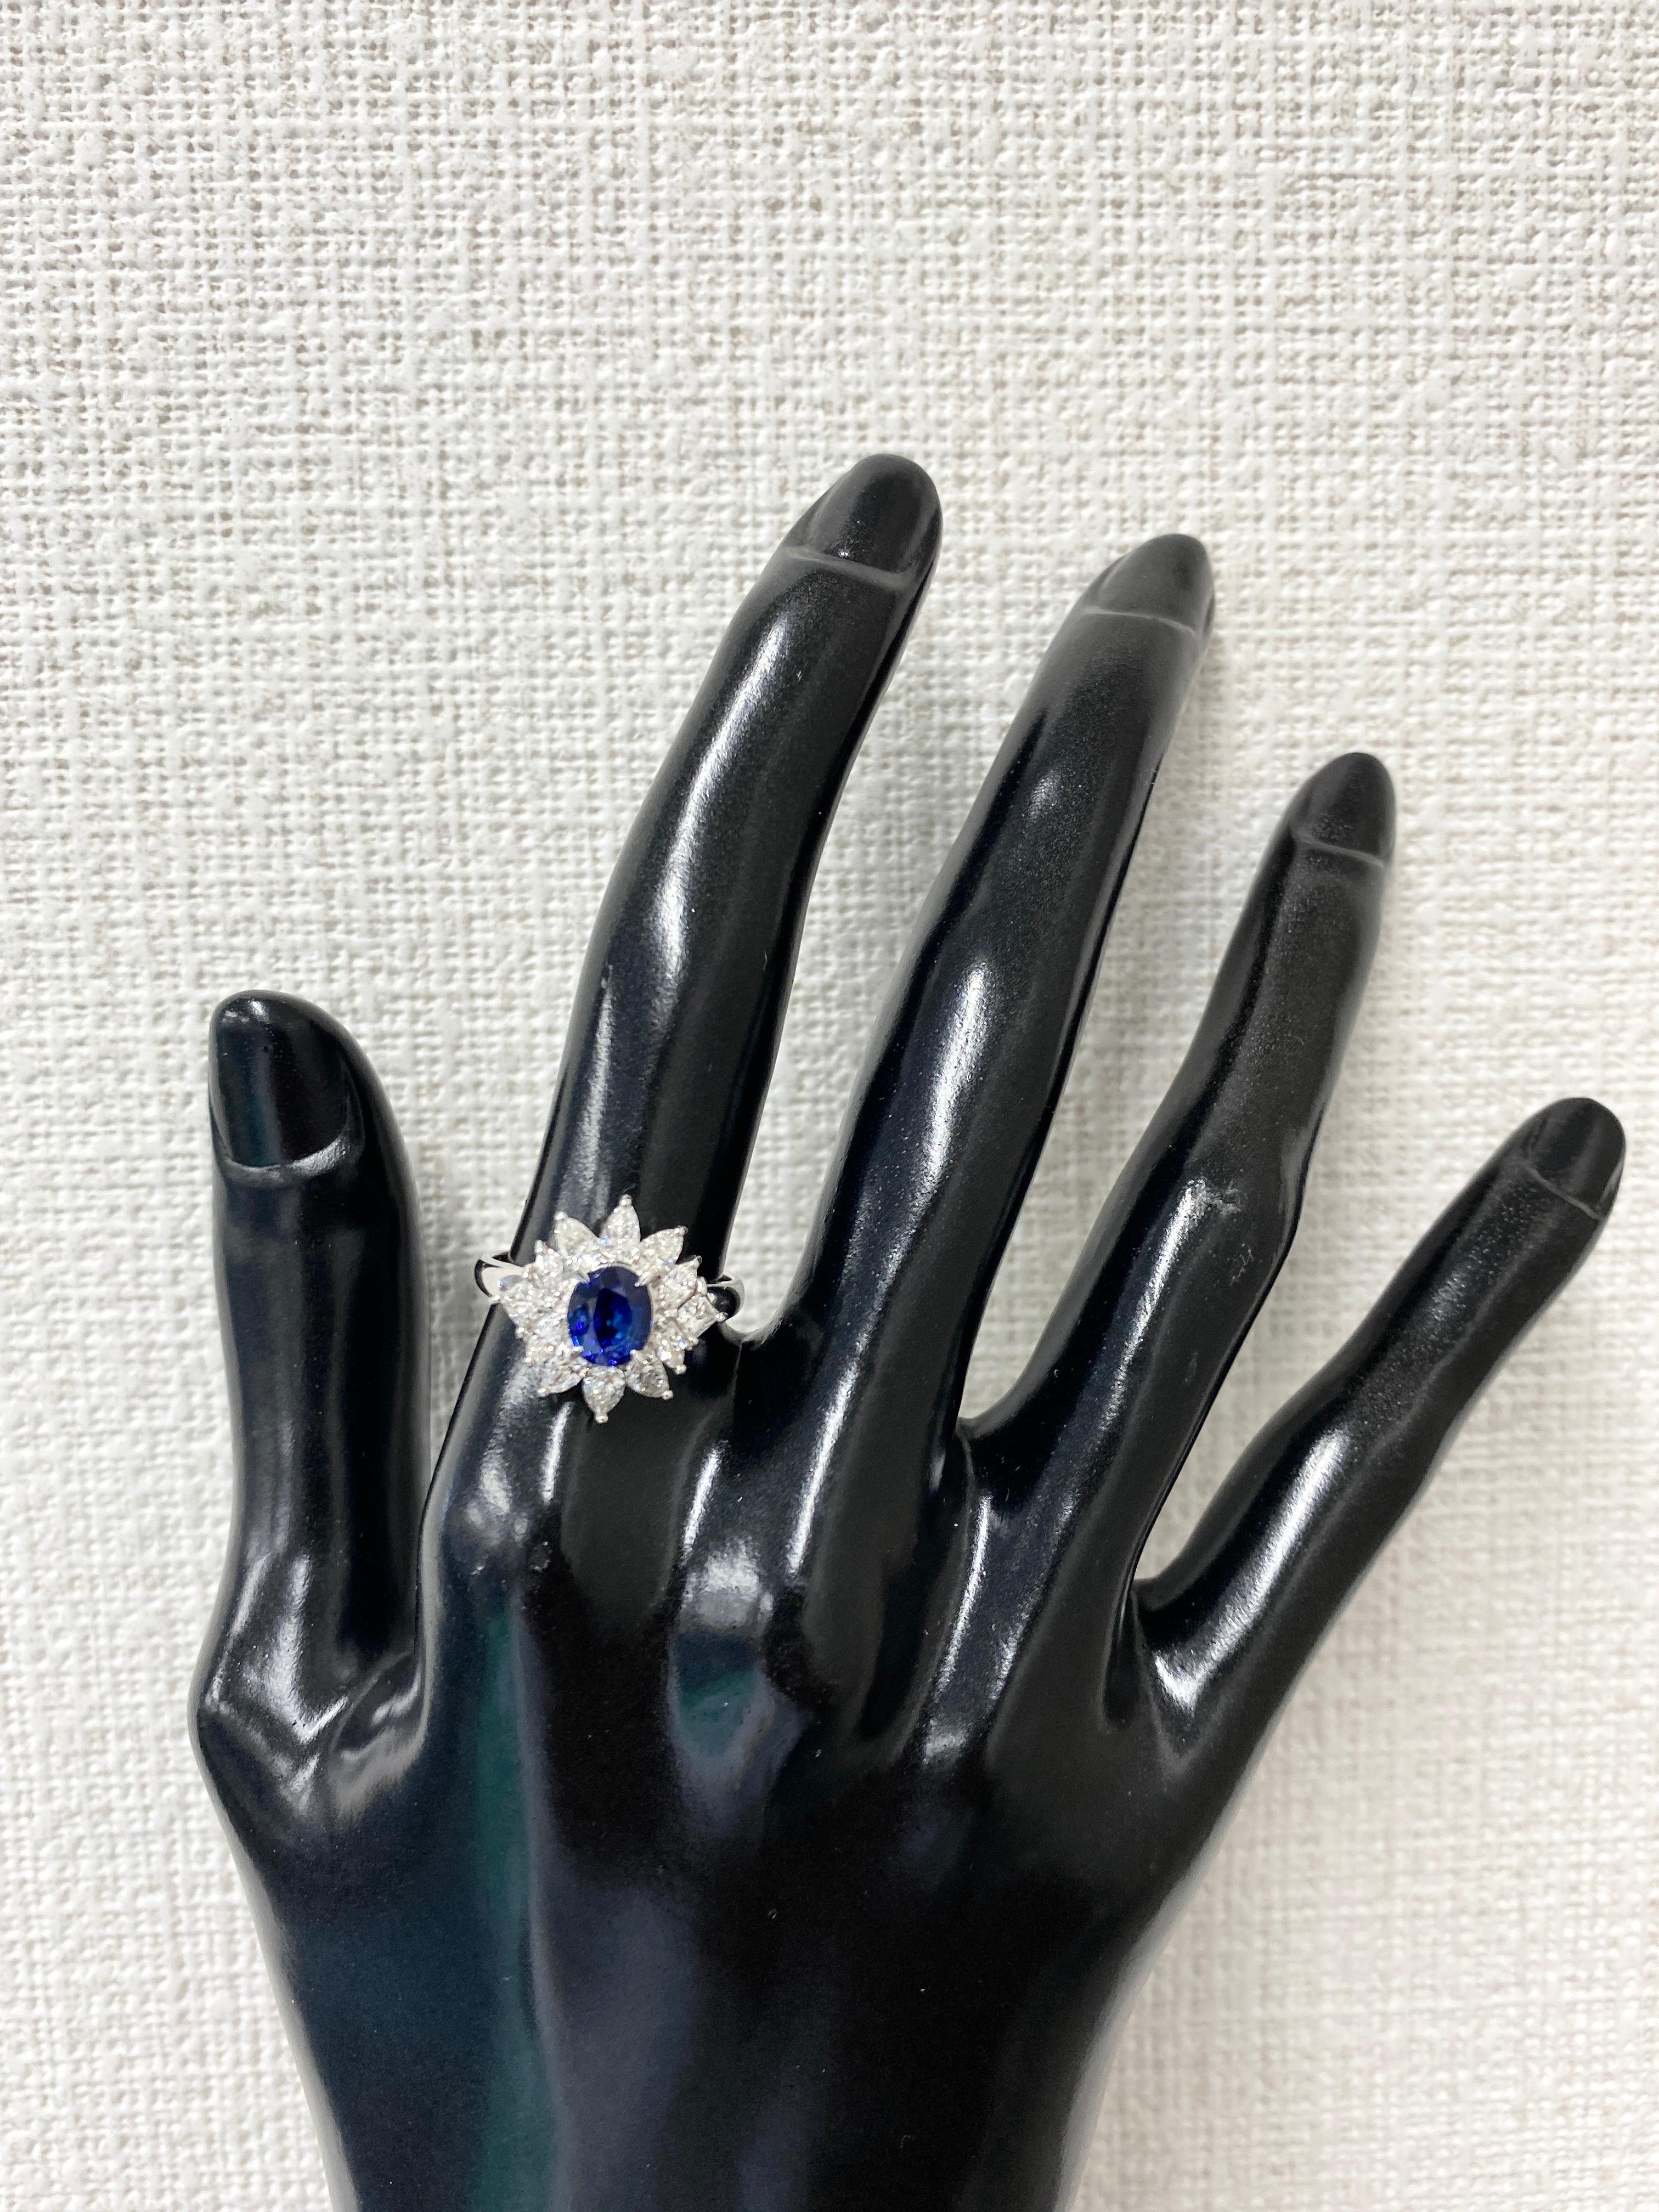 Women's 1.11 Carat Natural Royal Blue Sapphire and Diamond Ring Set in Platinum For Sale